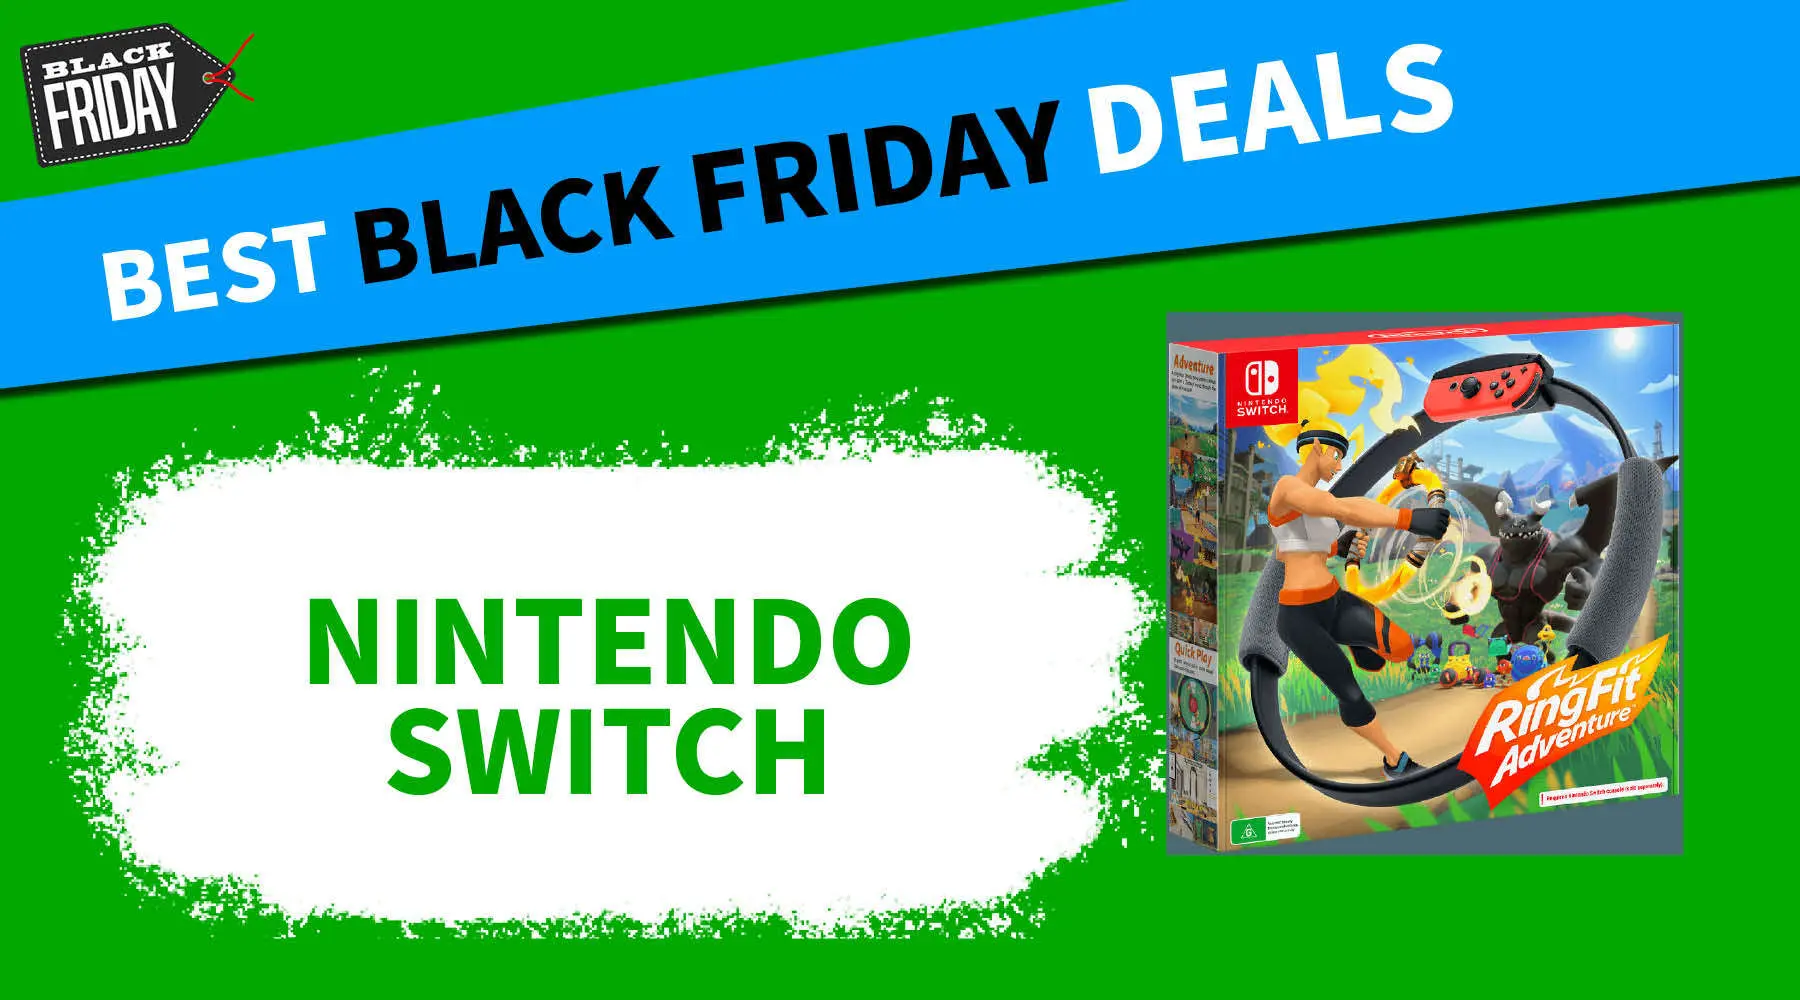 Get up to 59% off Nintendo Switch games this Black Friday - Will There Be Black Friday Deals On Switch